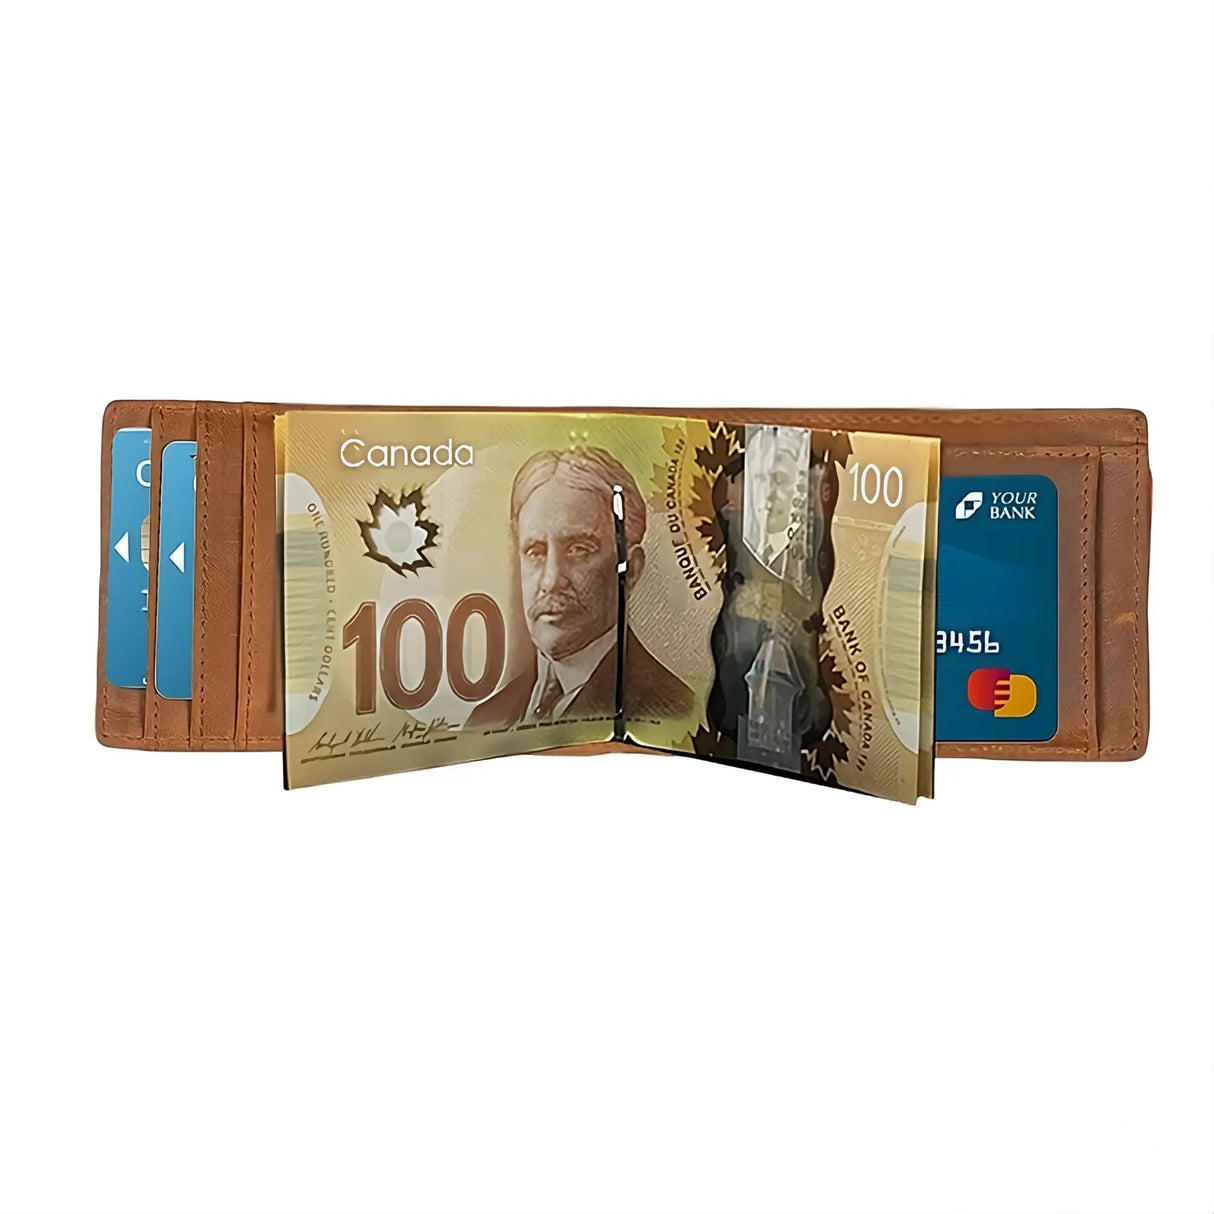 Money Clip Wallet - Holds up to 20 Bills and 12 Credit Cards - Cardholder